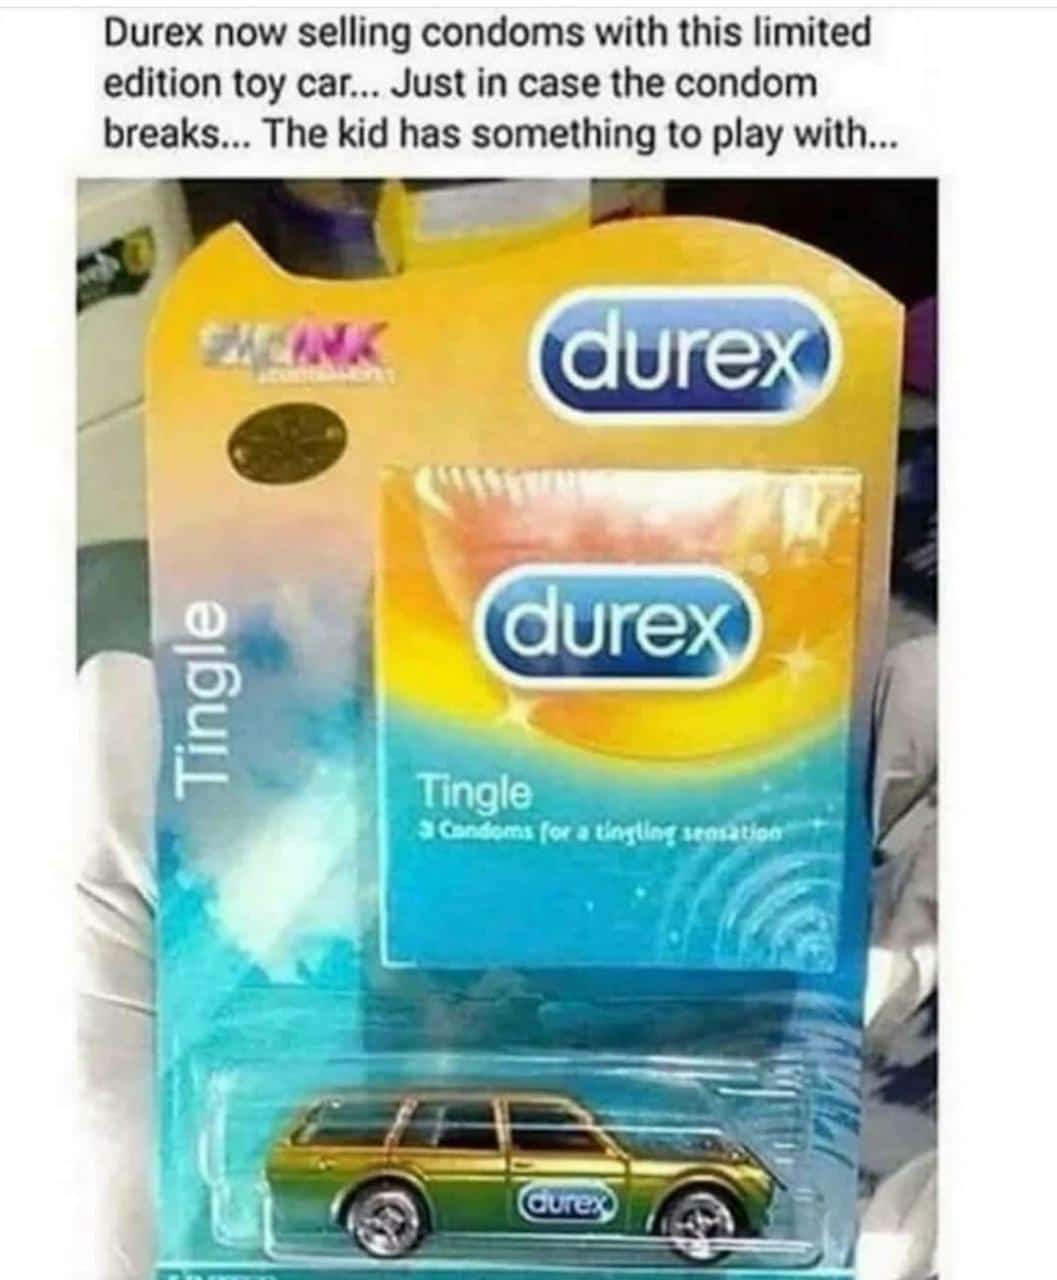 Dank, Ryan Dunn, Jackass, Condom other memes Dank, Ryan Dunn, Jackass, Condom text: Durex now selling condoms with this limited edition toy car... Just in case the condom breaks... The kid has something to play with... dure dure .1 